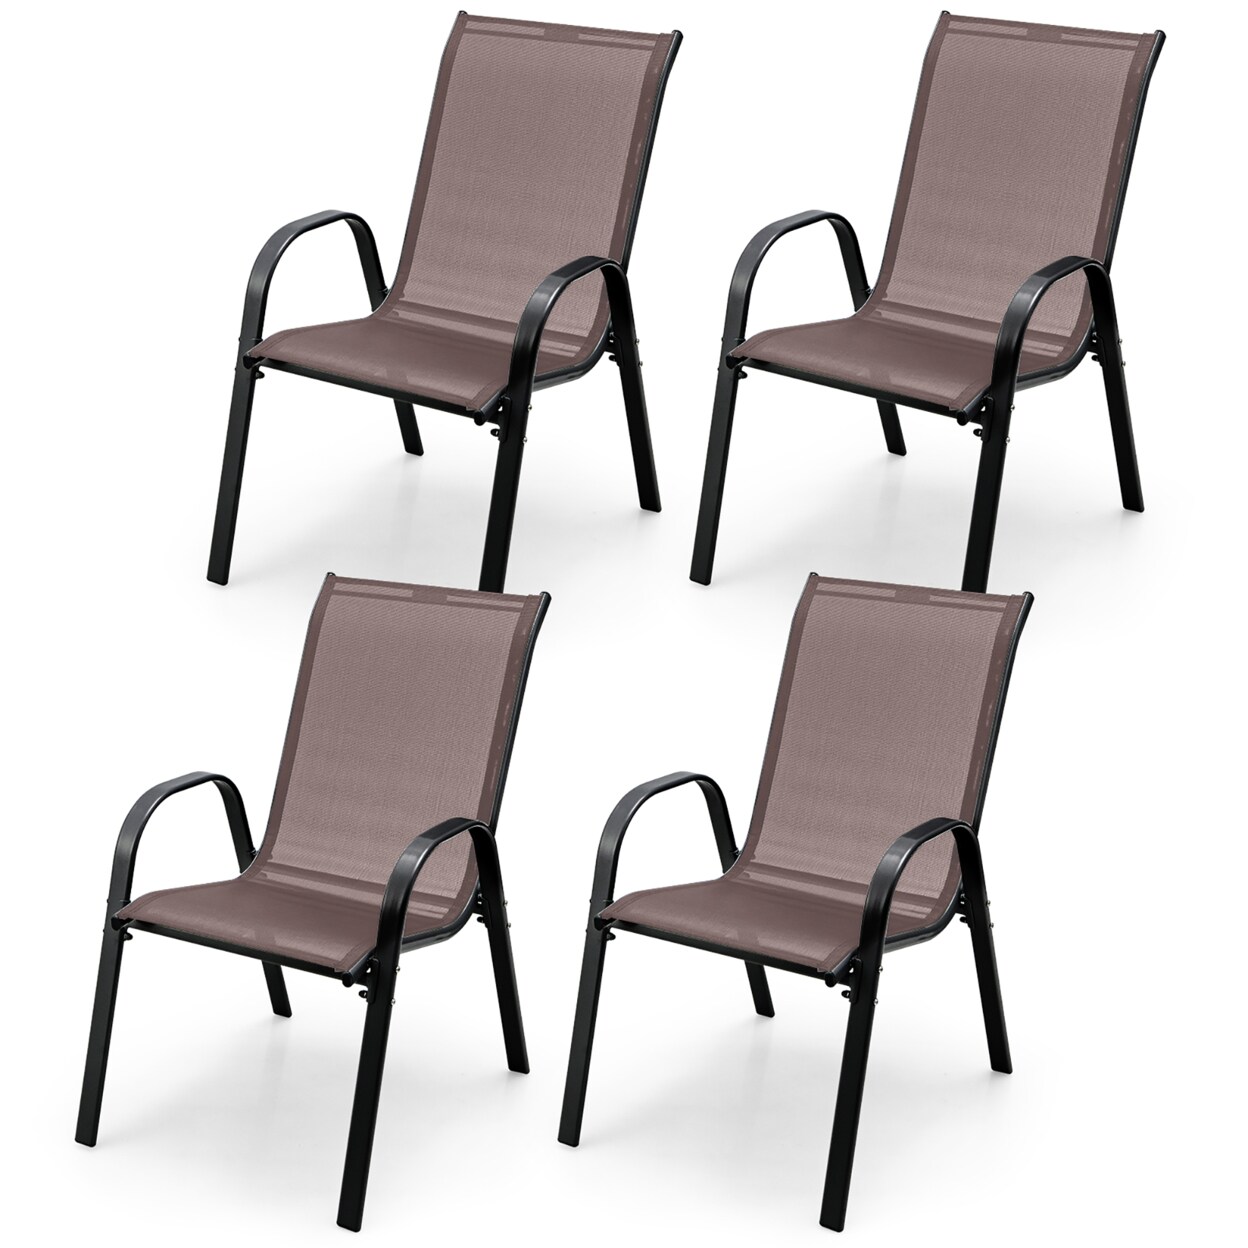 Gymax 4PCS Patio Stacking Dining Chairs w/ Curved Armrests and Breathable Seat Fabric Brown